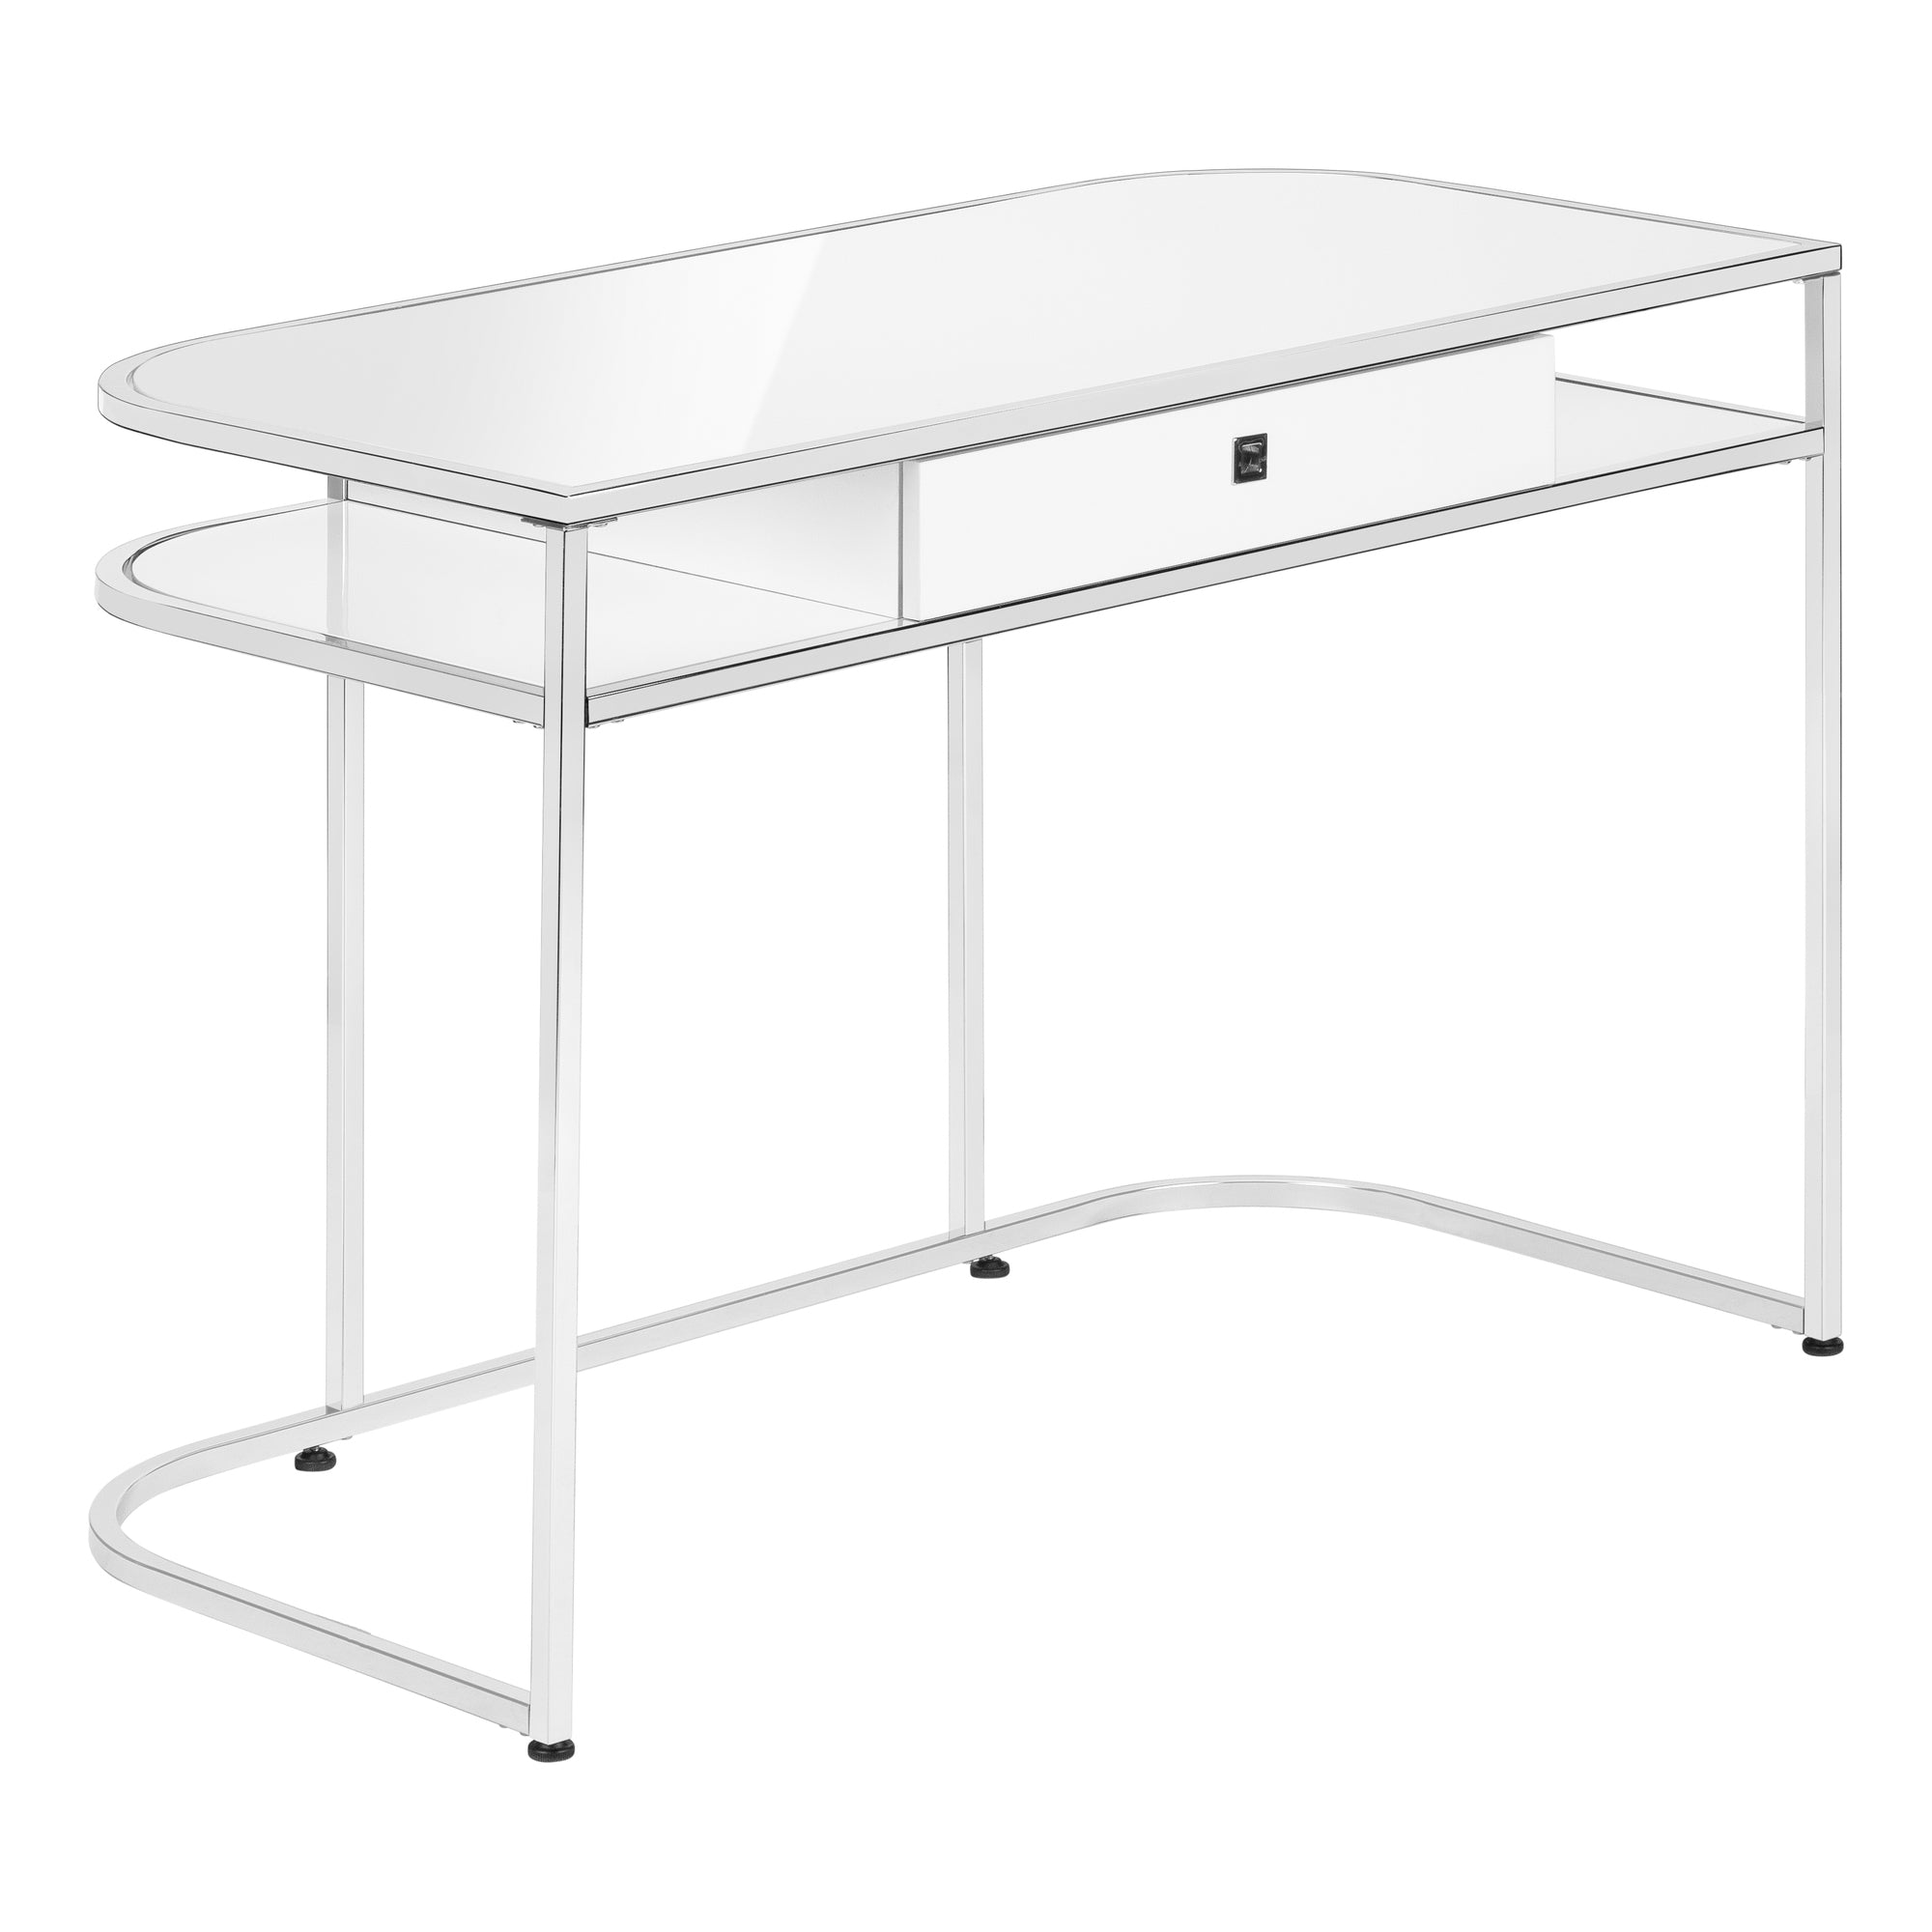 MN-547520    Computer Desk, Home Office, Laptop, Storage Drawers, 48"L, Metal, Laminate, White, Contemporary, Glam, Modern